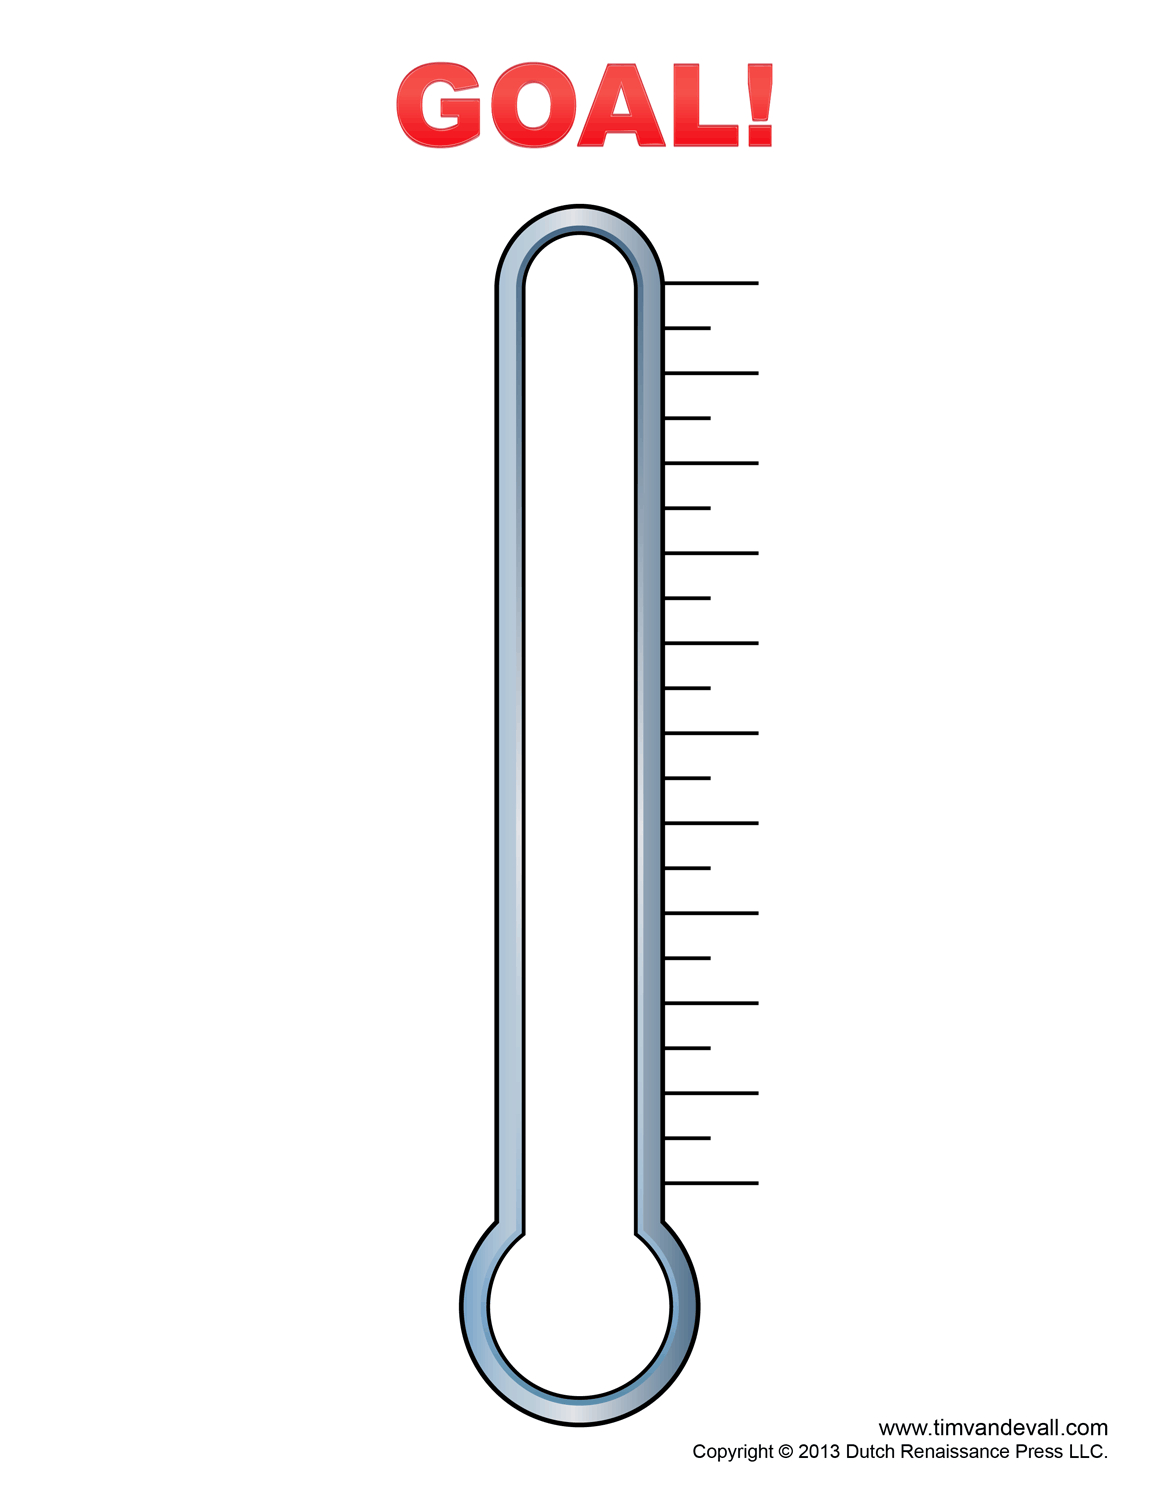 Fundraising Thermometer Template | For J | Pinterest | Goal - Free Printable Thermometer Goal Chart